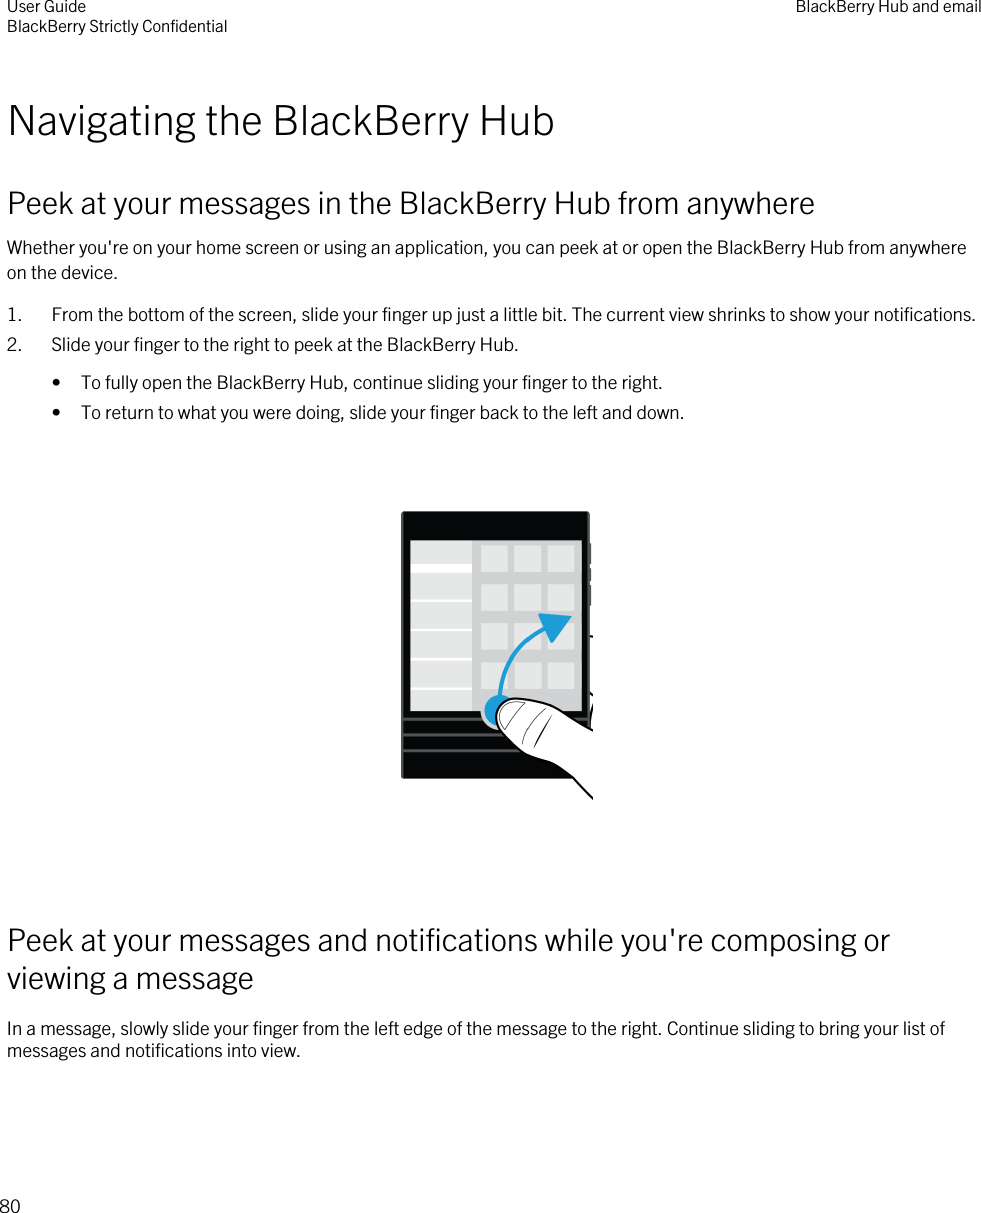 Navigating the BlackBerry HubPeek at your messages in the BlackBerry Hub from anywhereWhether you&apos;re on your home screen or using an application, you can peek at or open the BlackBerry Hub from anywhere on the device.1. From the bottom of the screen, slide your finger up just a little bit. The current view shrinks to show your notifications.2. Slide your finger to the right to peek at the BlackBerry Hub.• To fully open the BlackBerry Hub, continue sliding your finger to the right.• To return to what you were doing, slide your finger back to the left and down.  Peek at your messages and notifications while you&apos;re composing or viewing a messageIn a message, slowly slide your finger from the left edge of the message to the right. Continue sliding to bring your list of messages and notifications into view. User GuideBlackBerry Strictly Confidential BlackBerry Hub and email80